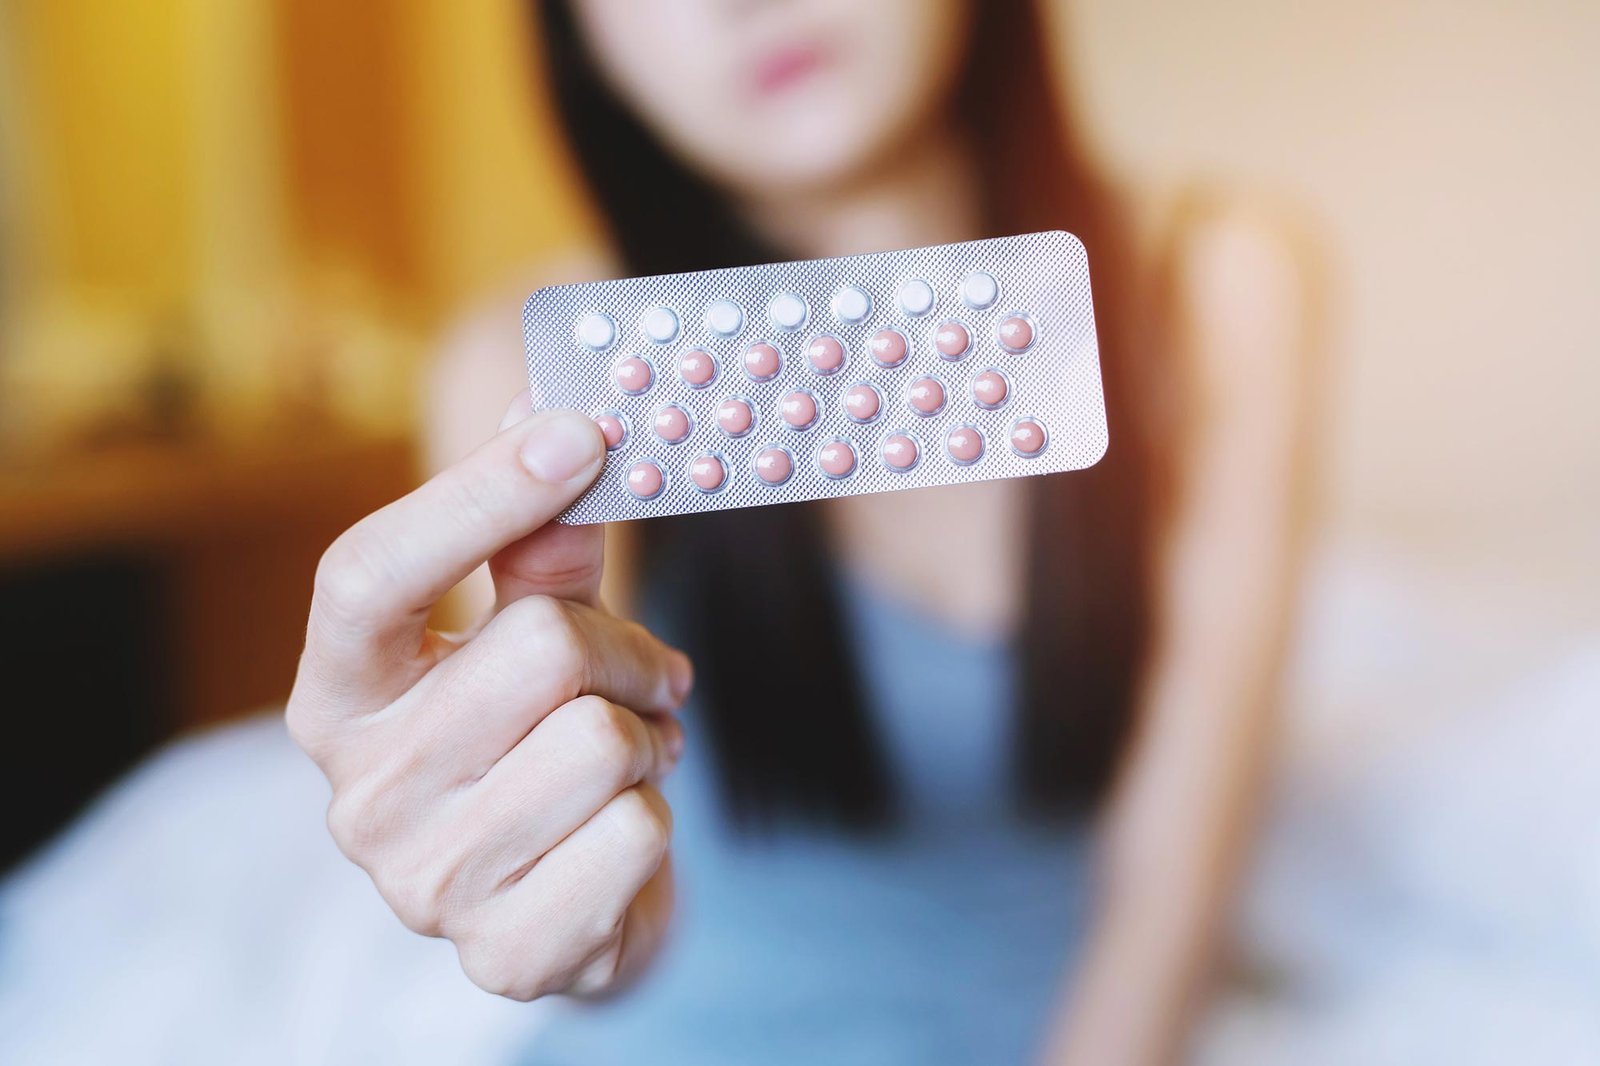 New Research Links the Type of Estrogen in Birth Control to Anxiety